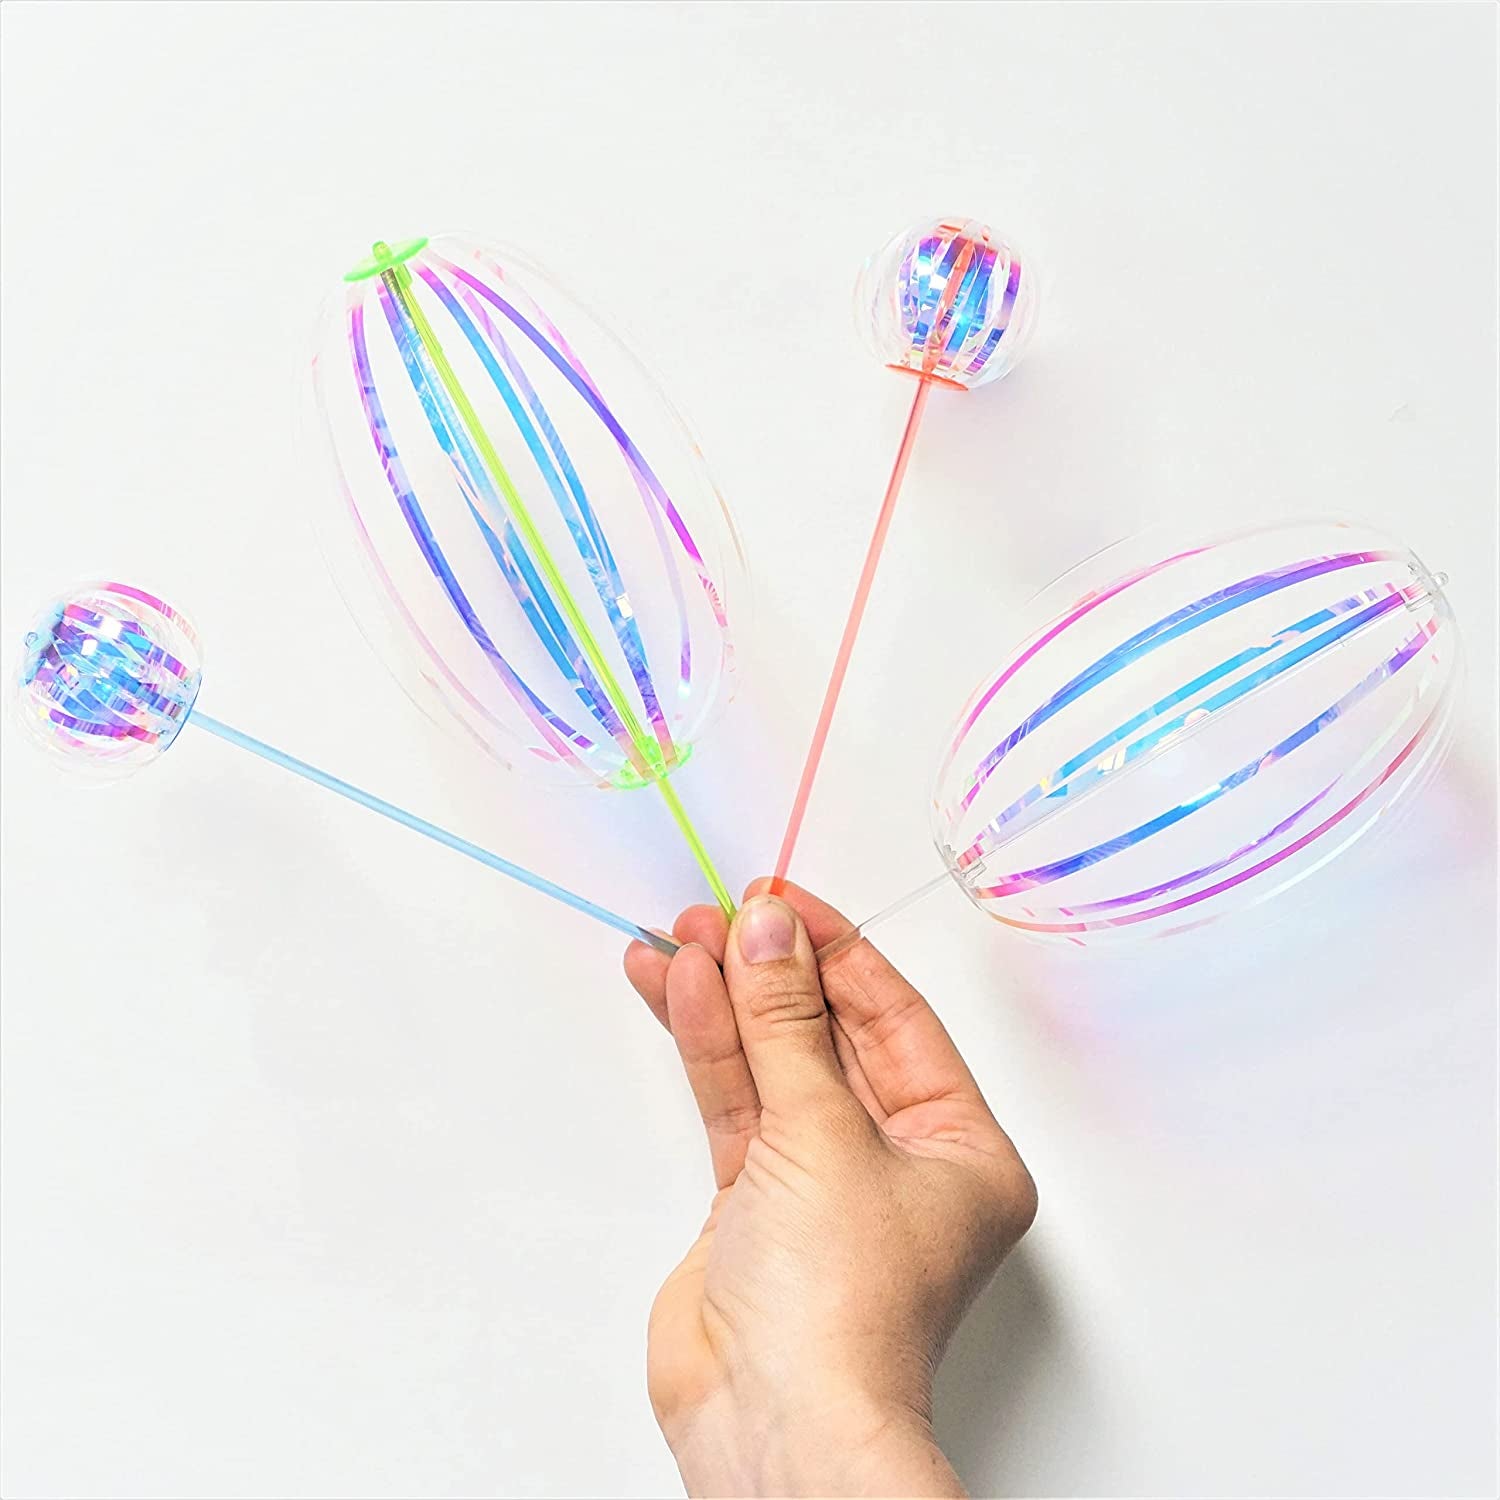 The twirler sticks with iridescent ribbons attached that make different round shapes